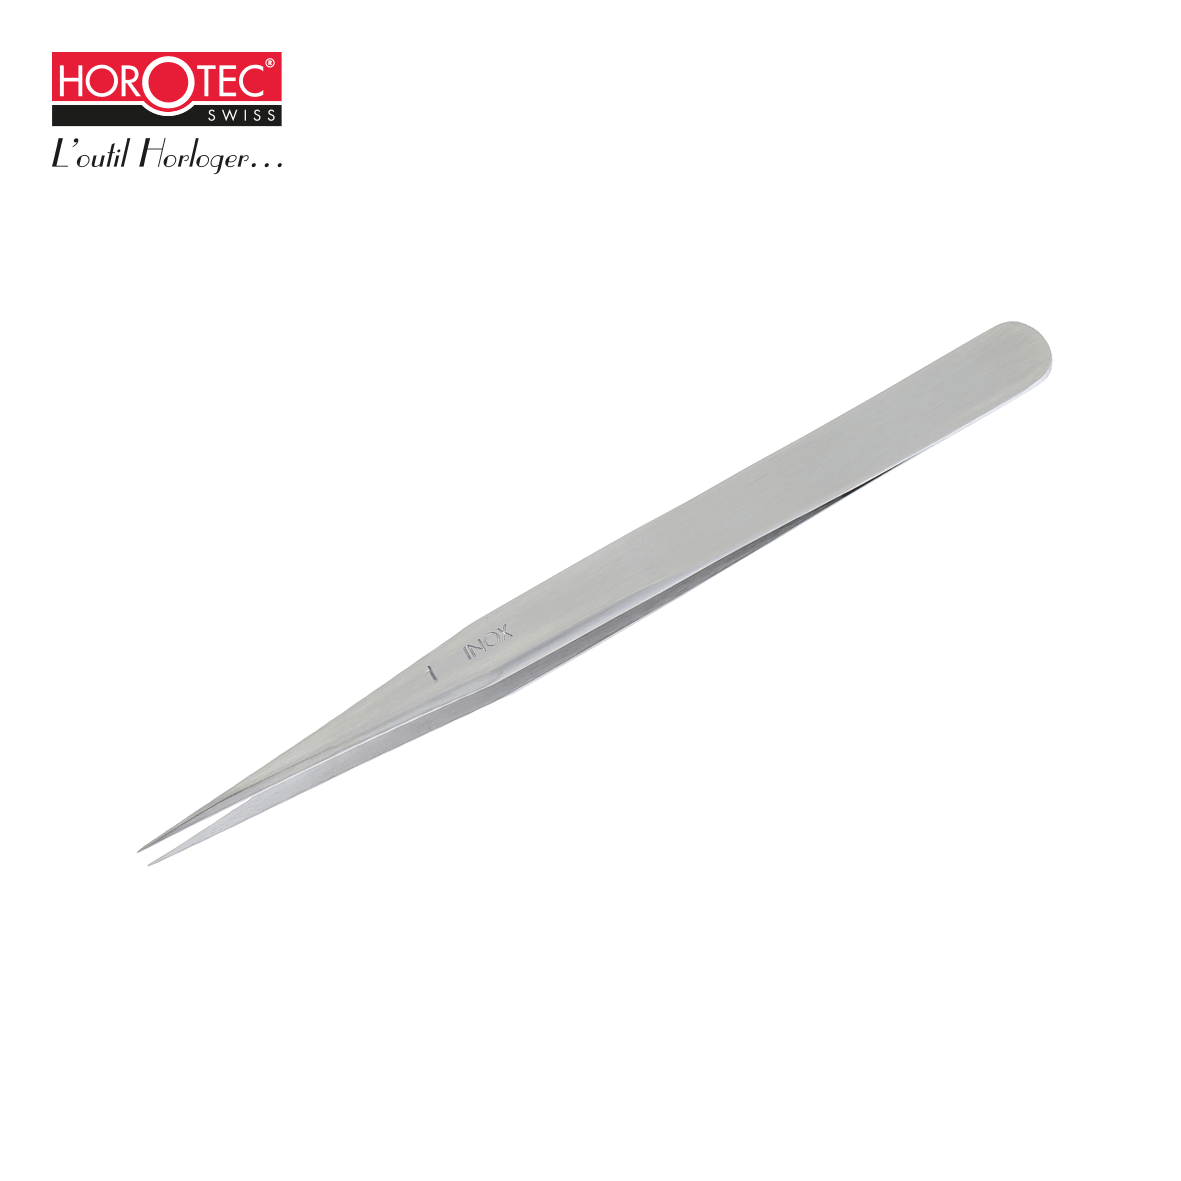 MSA12.301-1 HOROTEC® STRONG TWEEZERS, No. 1 / STAINLESS STEEL . L120 mm